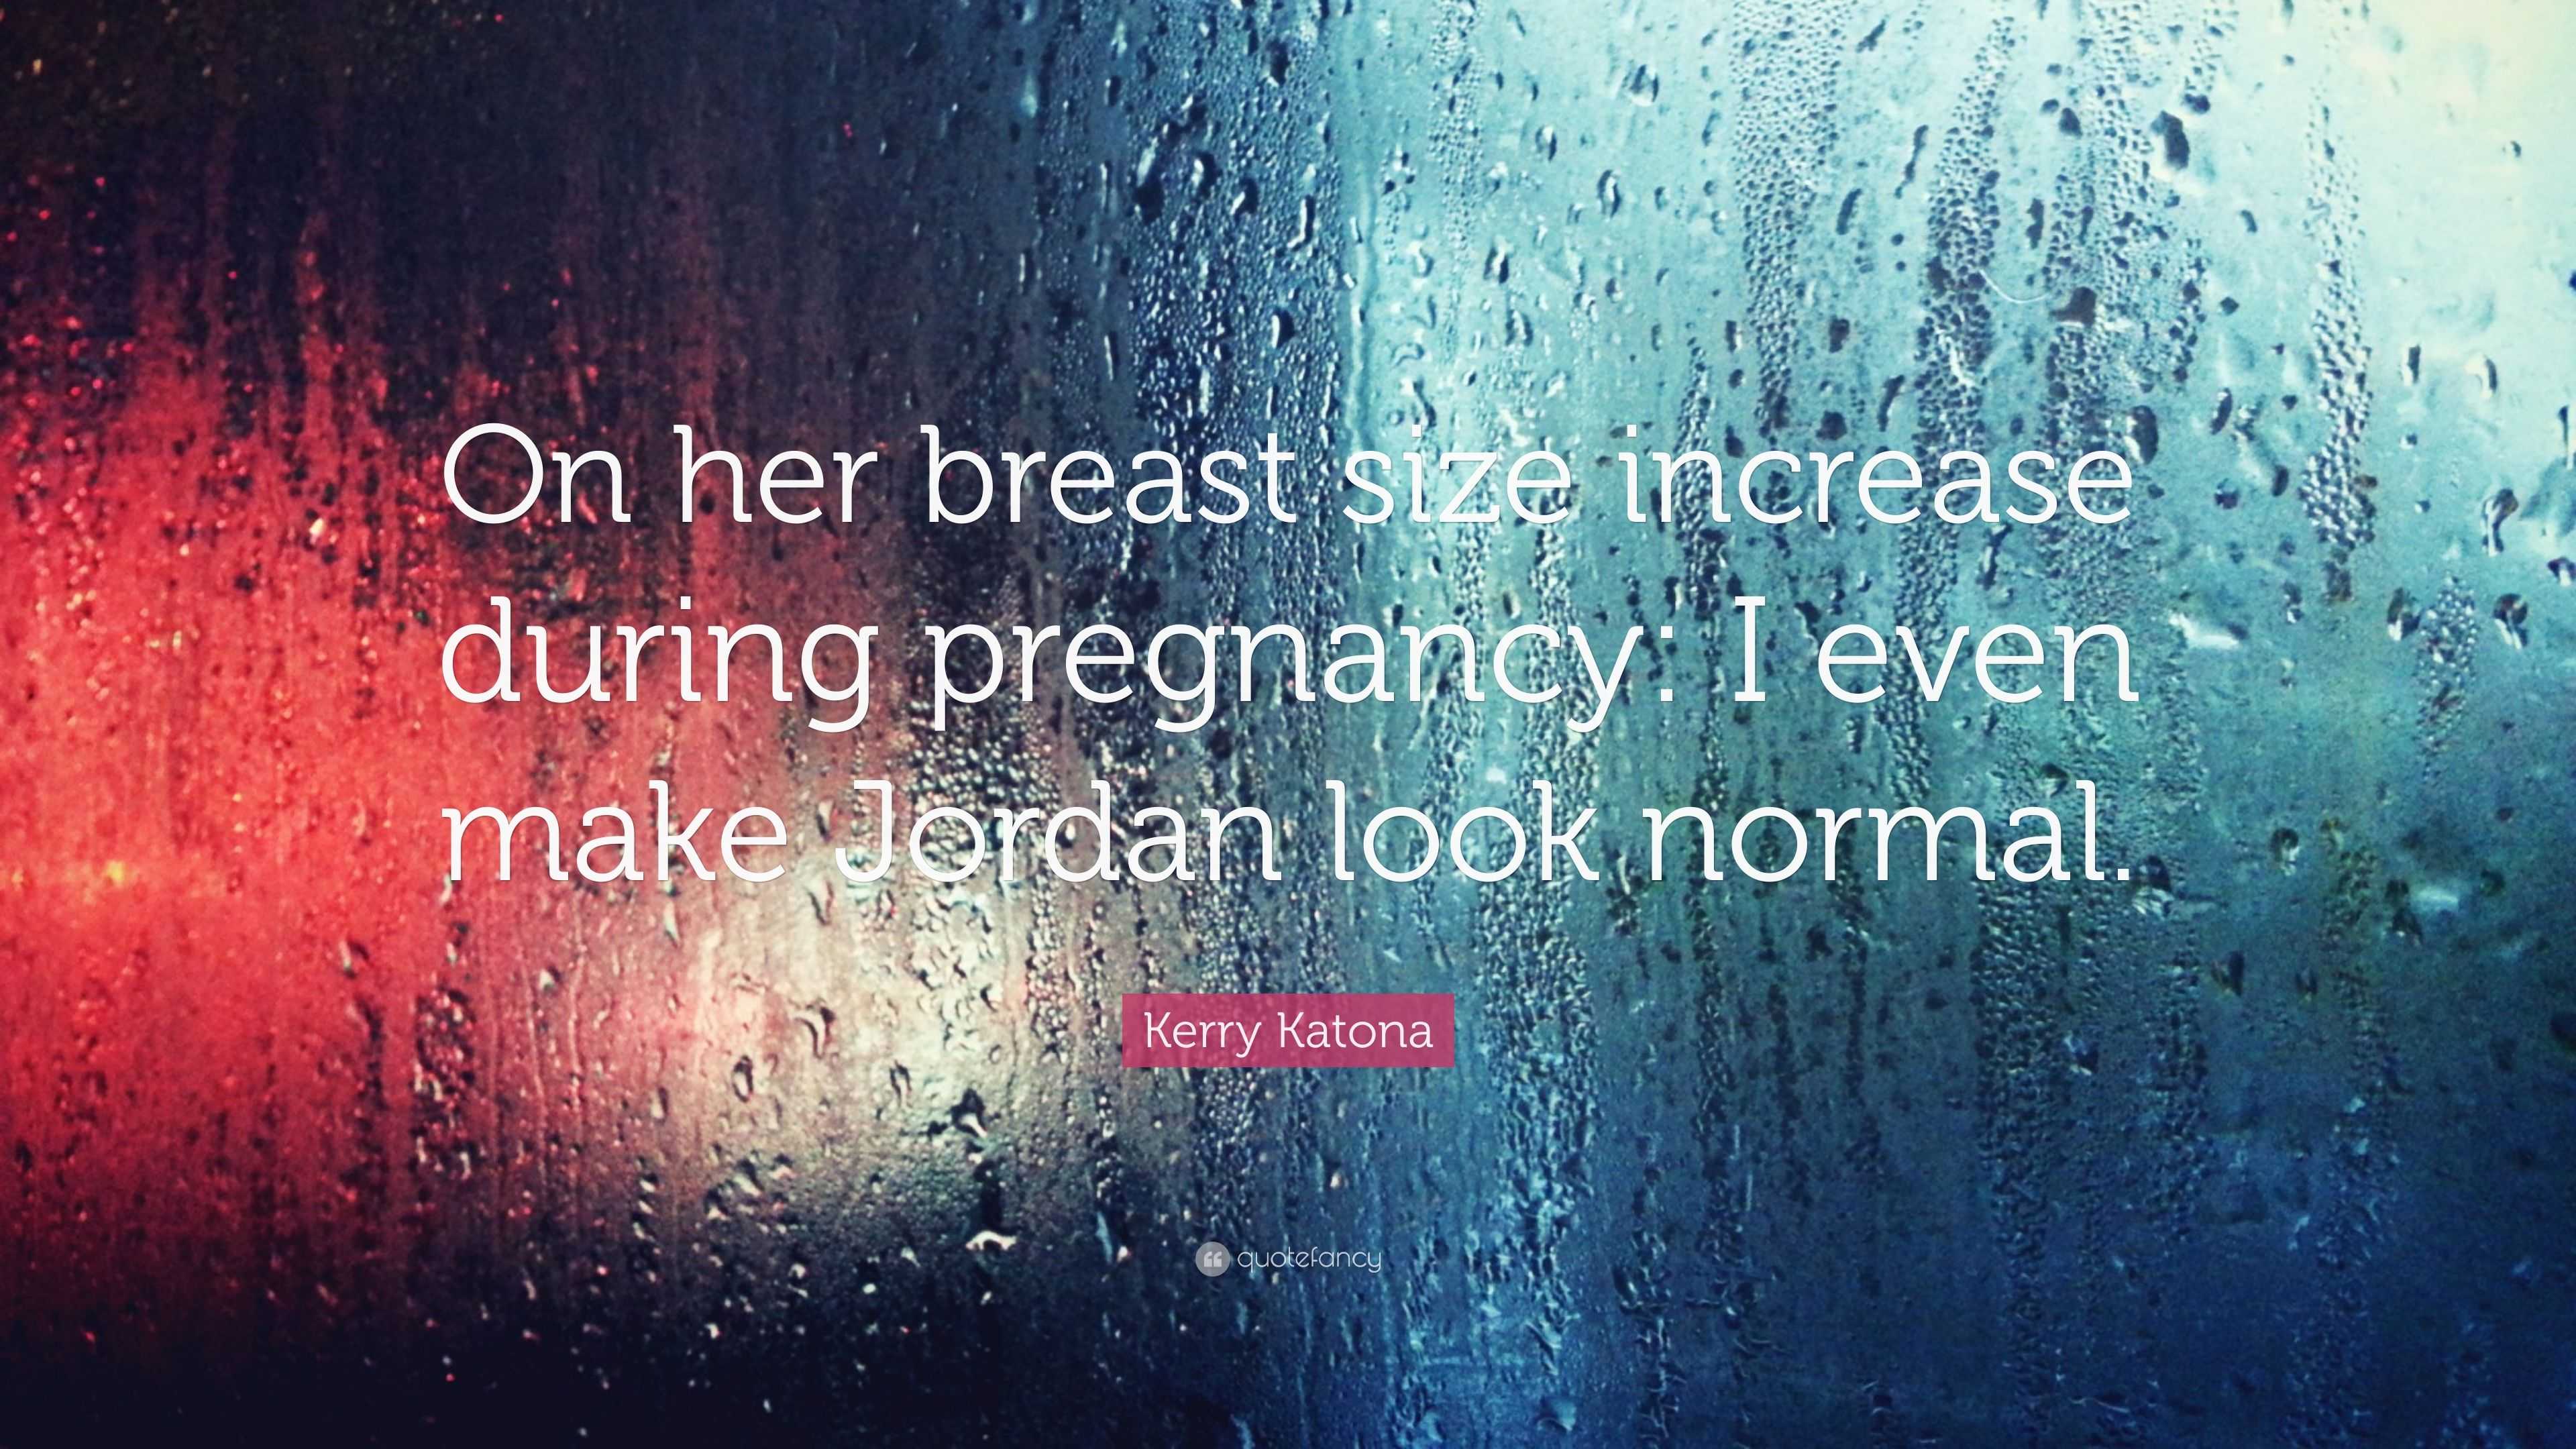 Kerry Katona Quote: “On her breast size increase during pregnancy: I even  make Jordan look normal.”